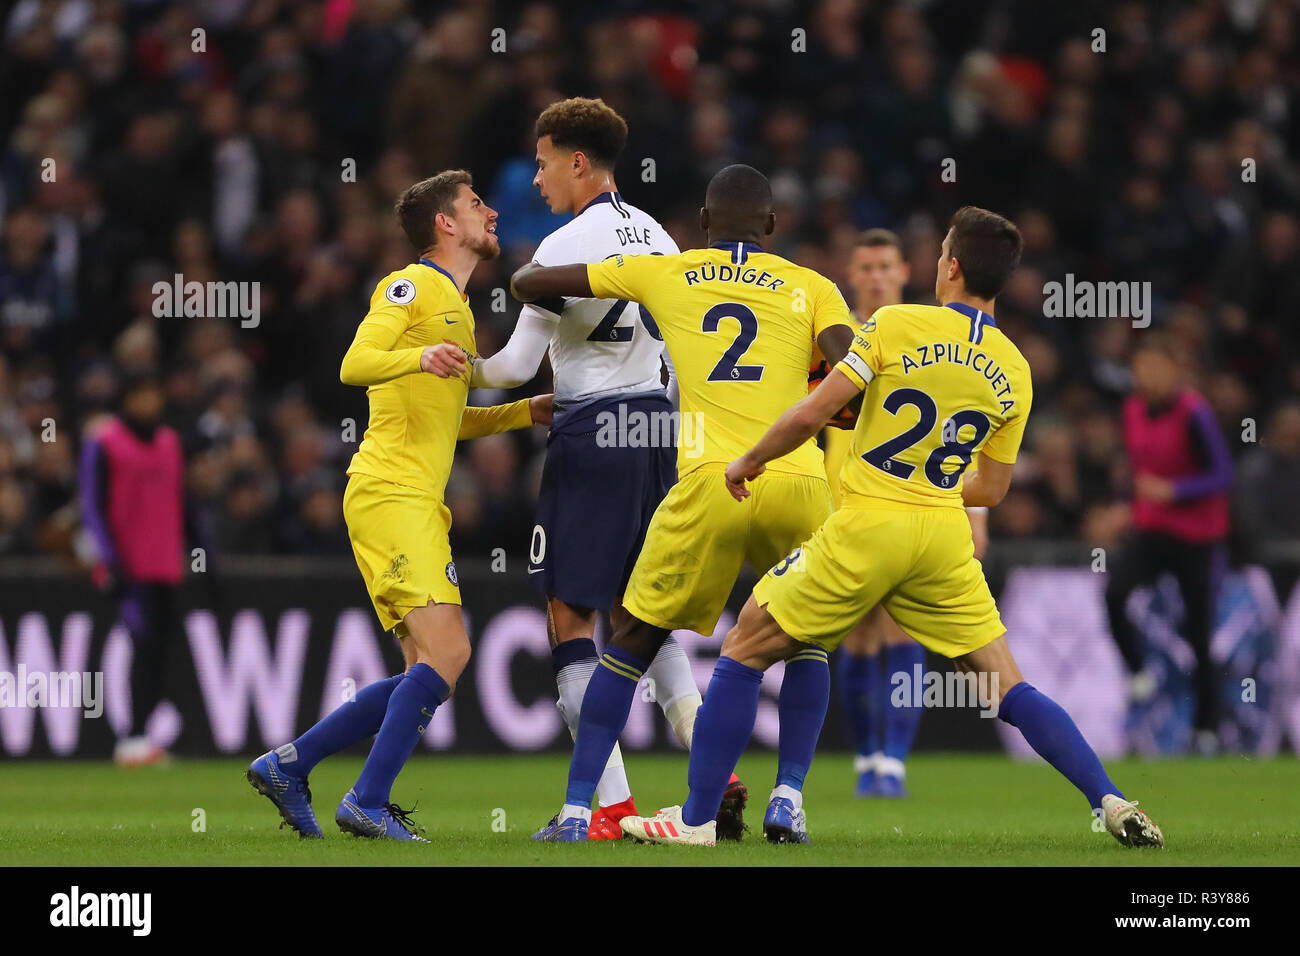 Dele Alli of Tottenham and Willian of Chelsea seen during the